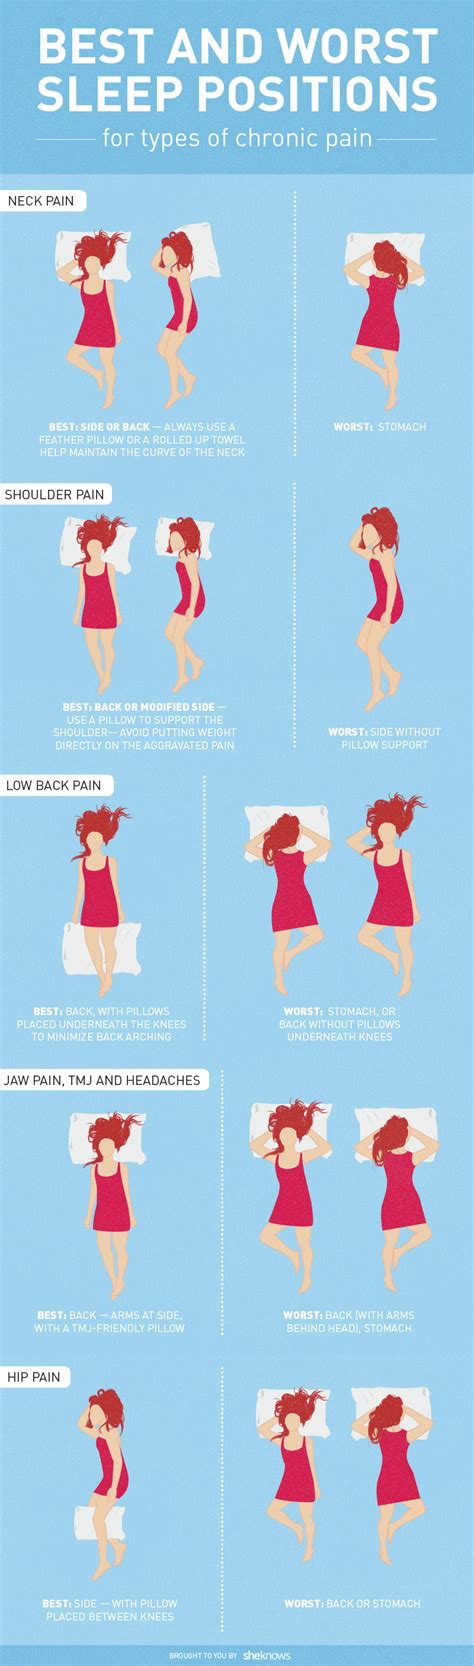 The Best And Worst Sleeping Positions For Chronic Pain Infographic